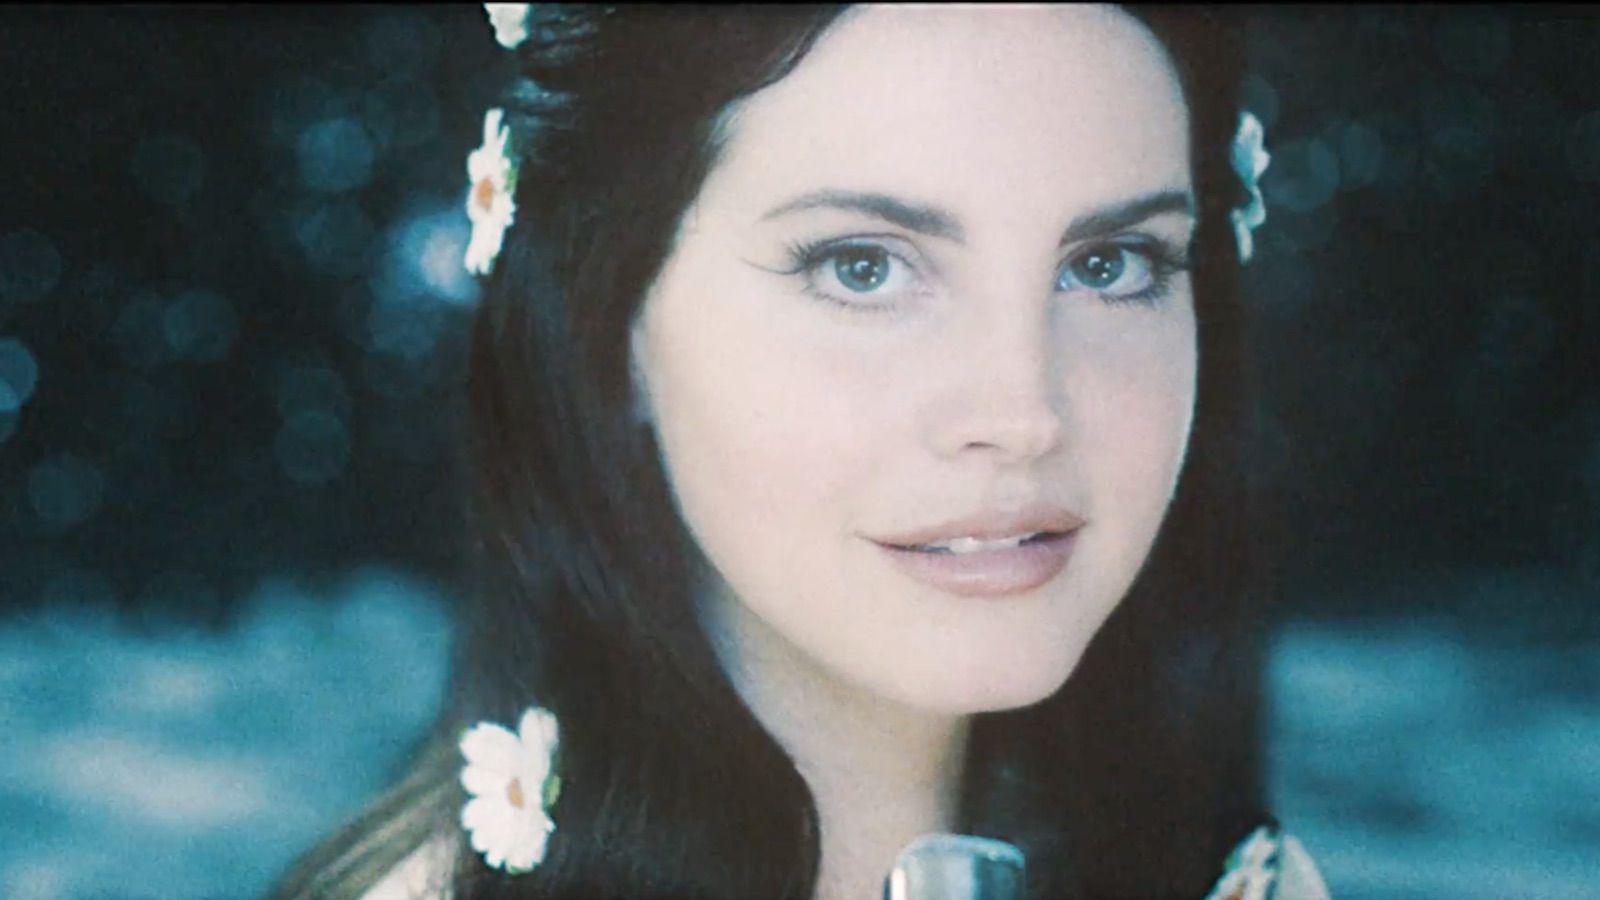 All of Lana's 60s and 70s rock references on Lust for Life